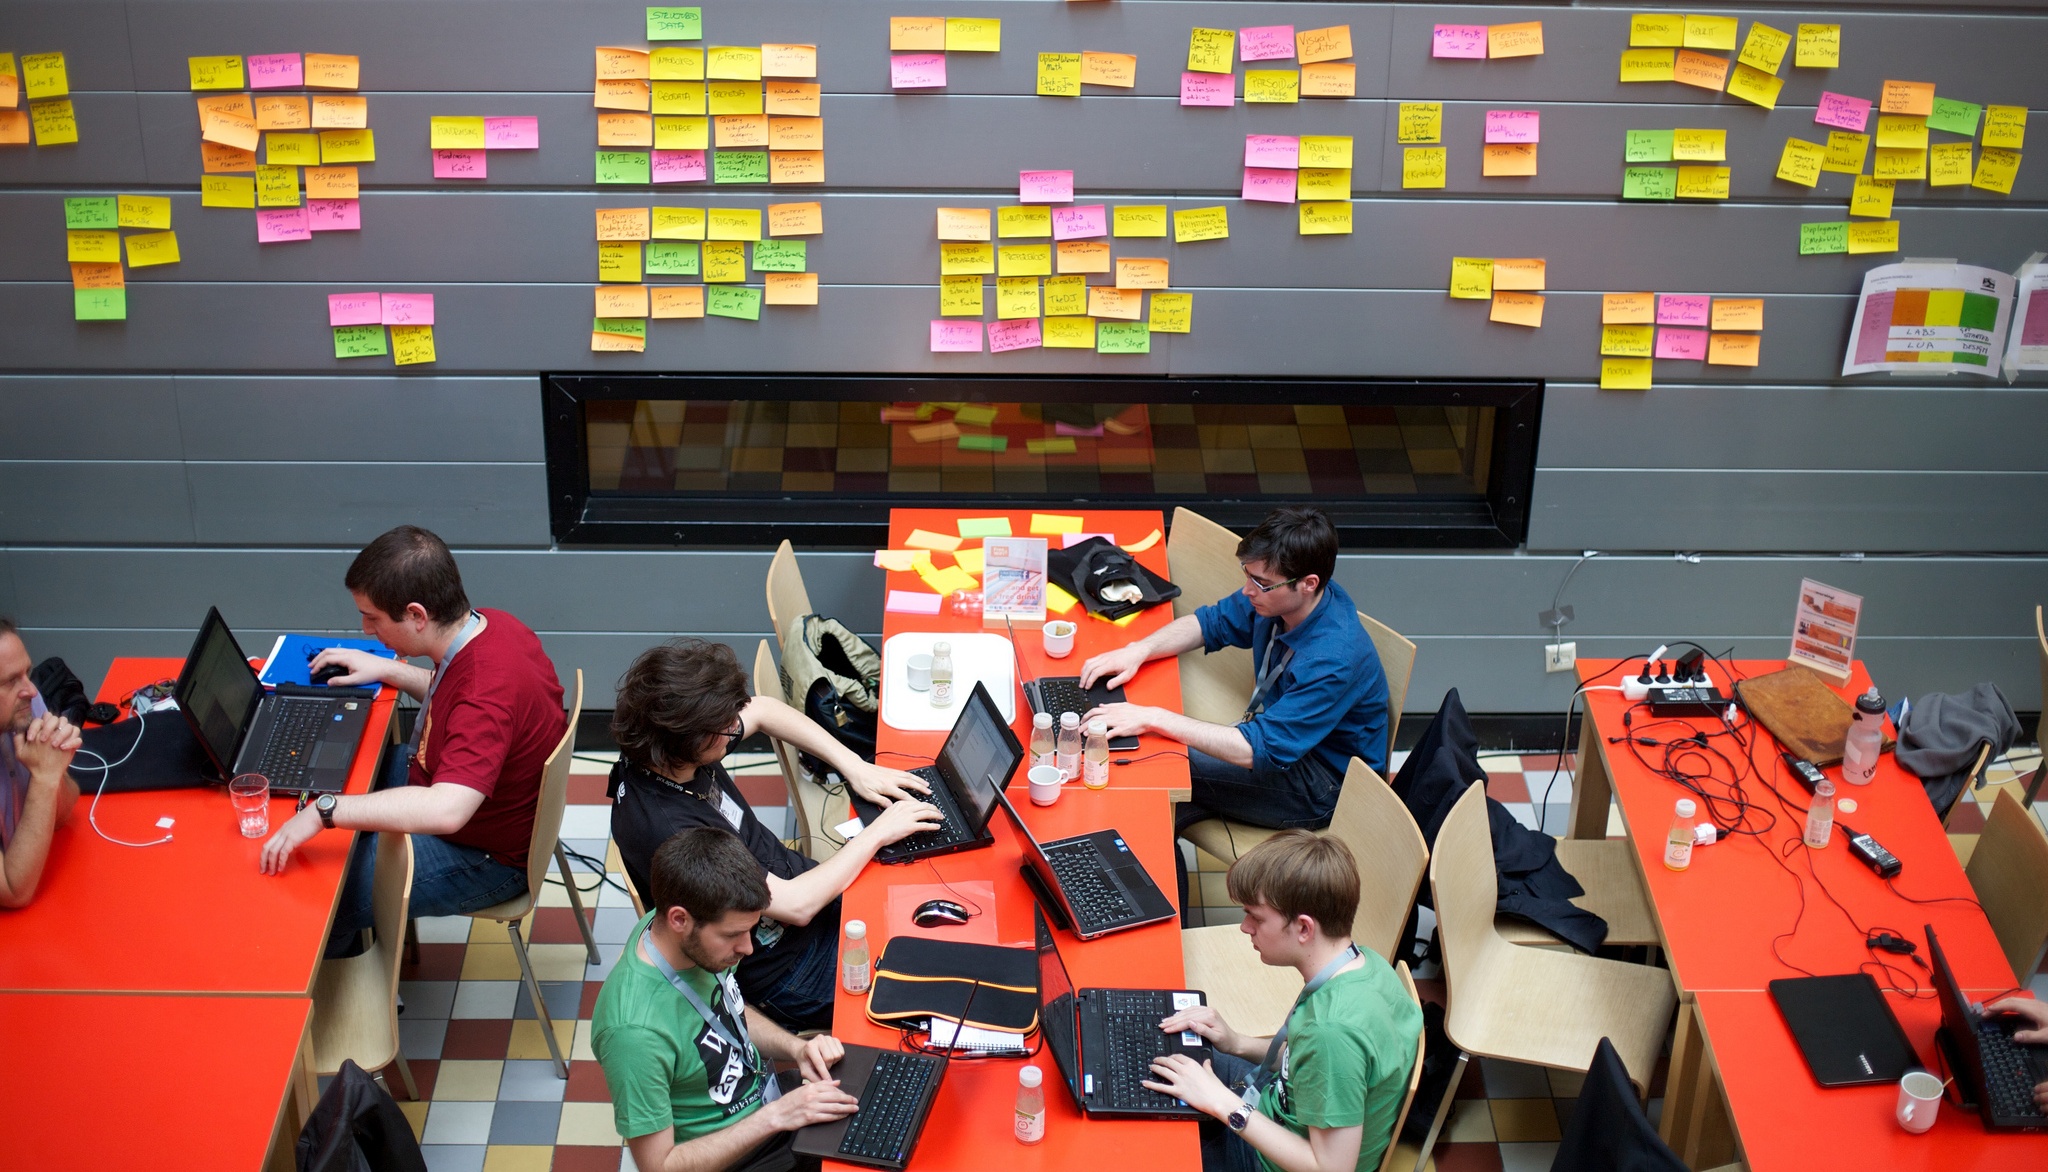 Group of people sitting around a table coding in front of a wall covered in sticky notes displaying the system they're working on.